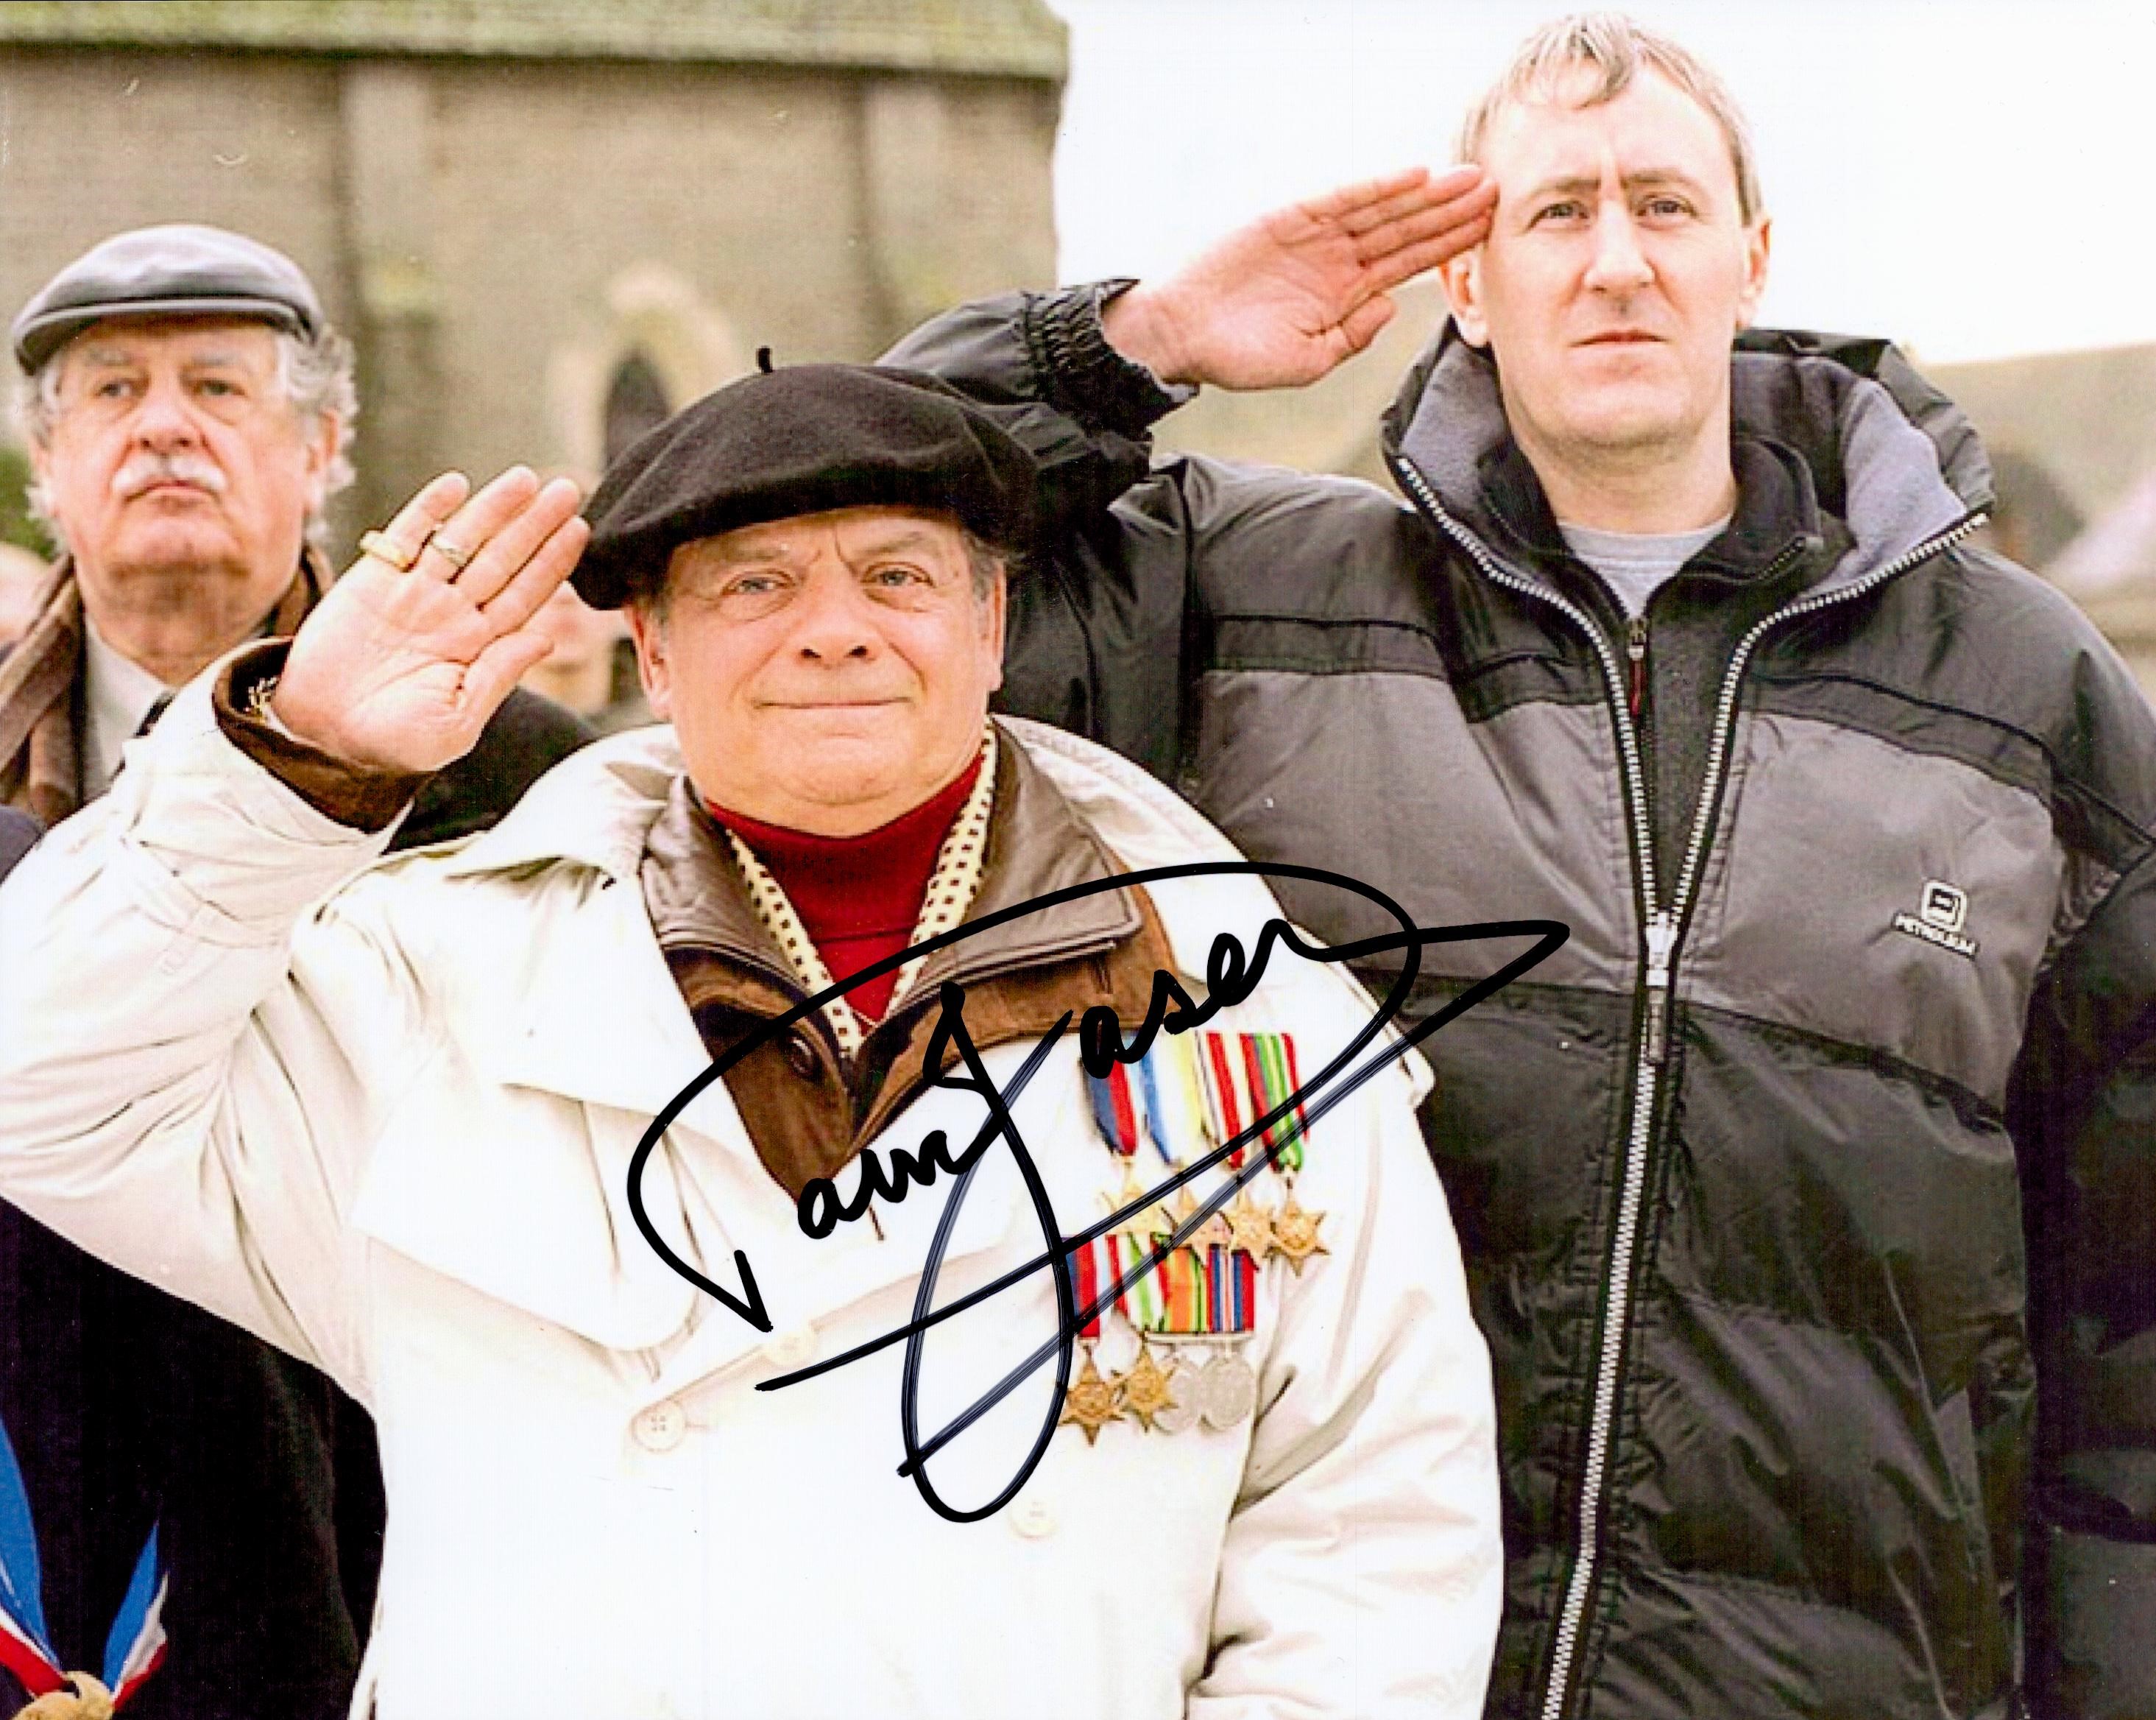 David Jason signed 12 x 8 inch colour Only Fools and Horses photo, Saluting with medals on his